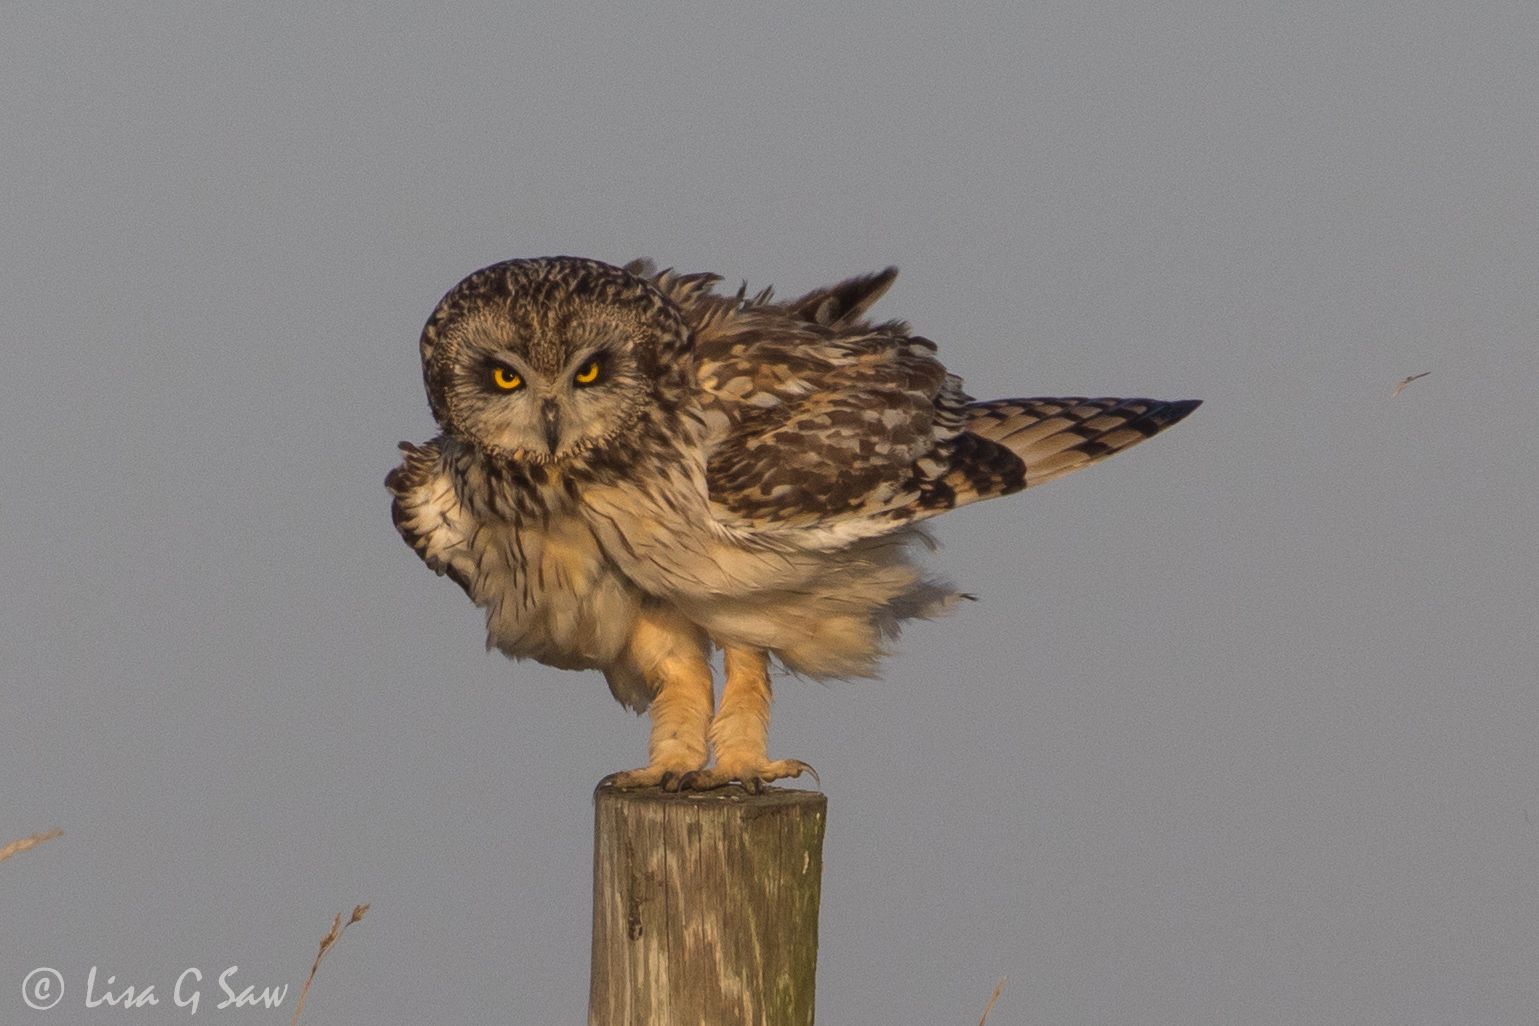 Short-Eared Owl on post in the wind